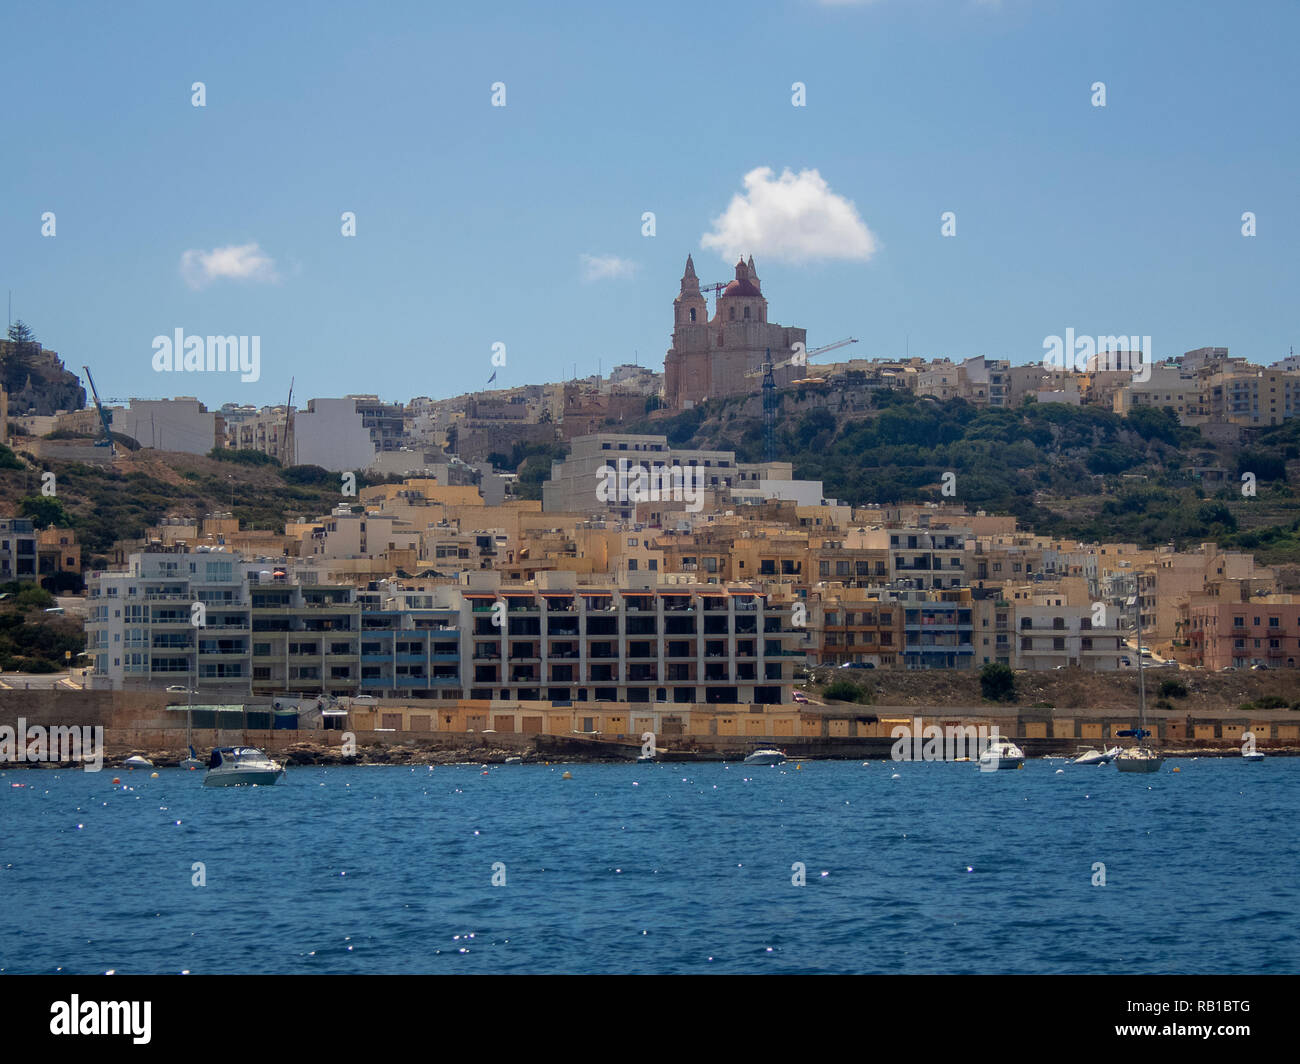 The Parish Church of Mellieha on top of the hill overlooking the town in Malta Stock Photo